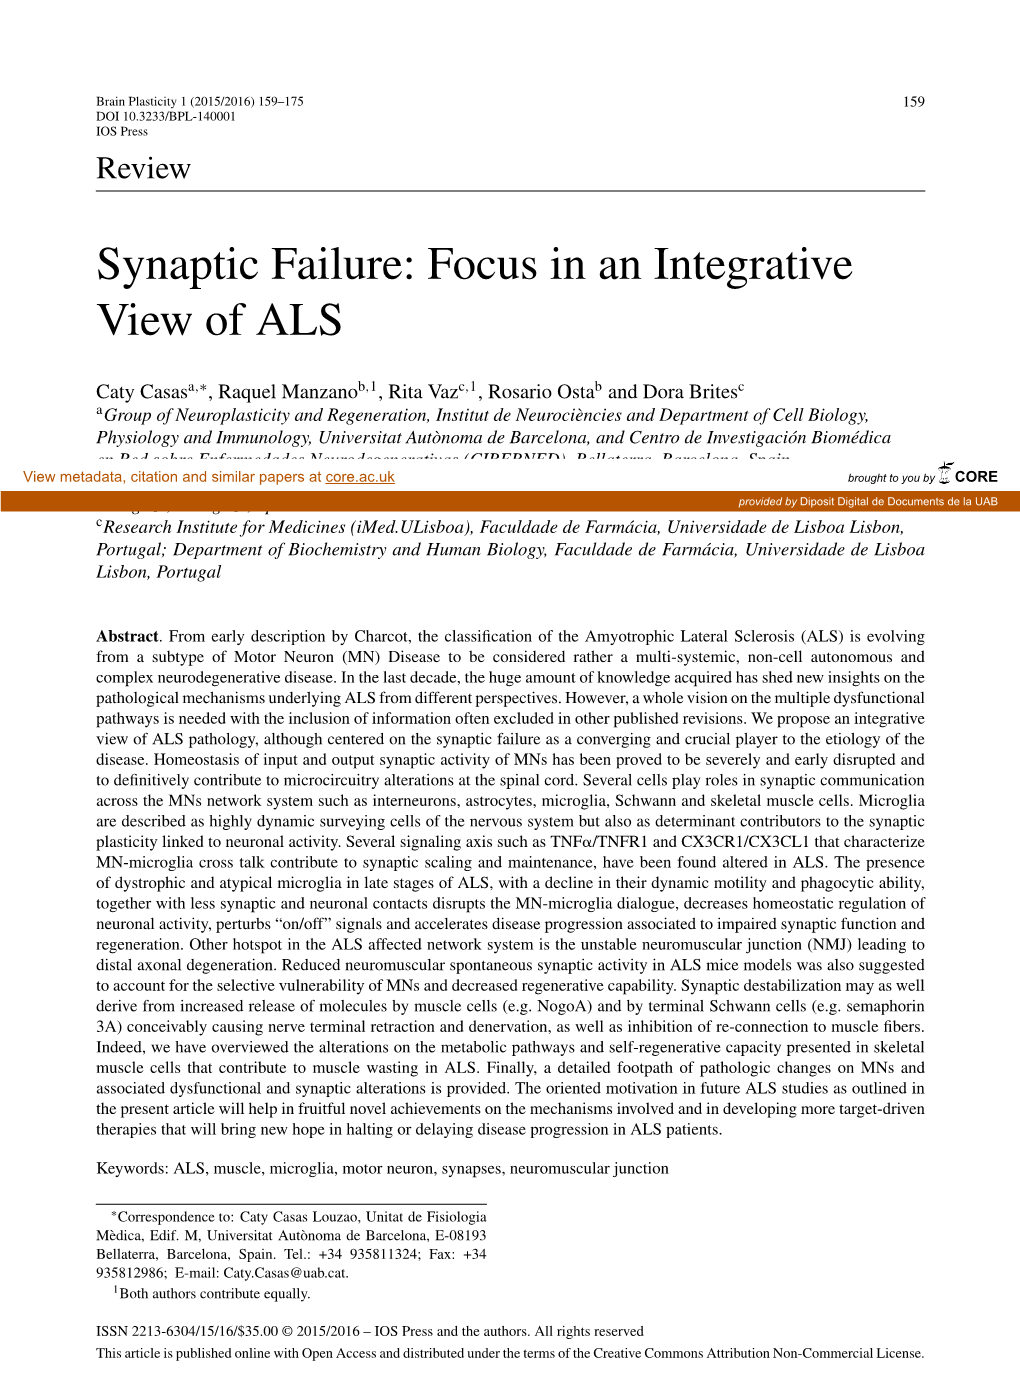 Synaptic Failure: Focus in an Integrative View of ALS